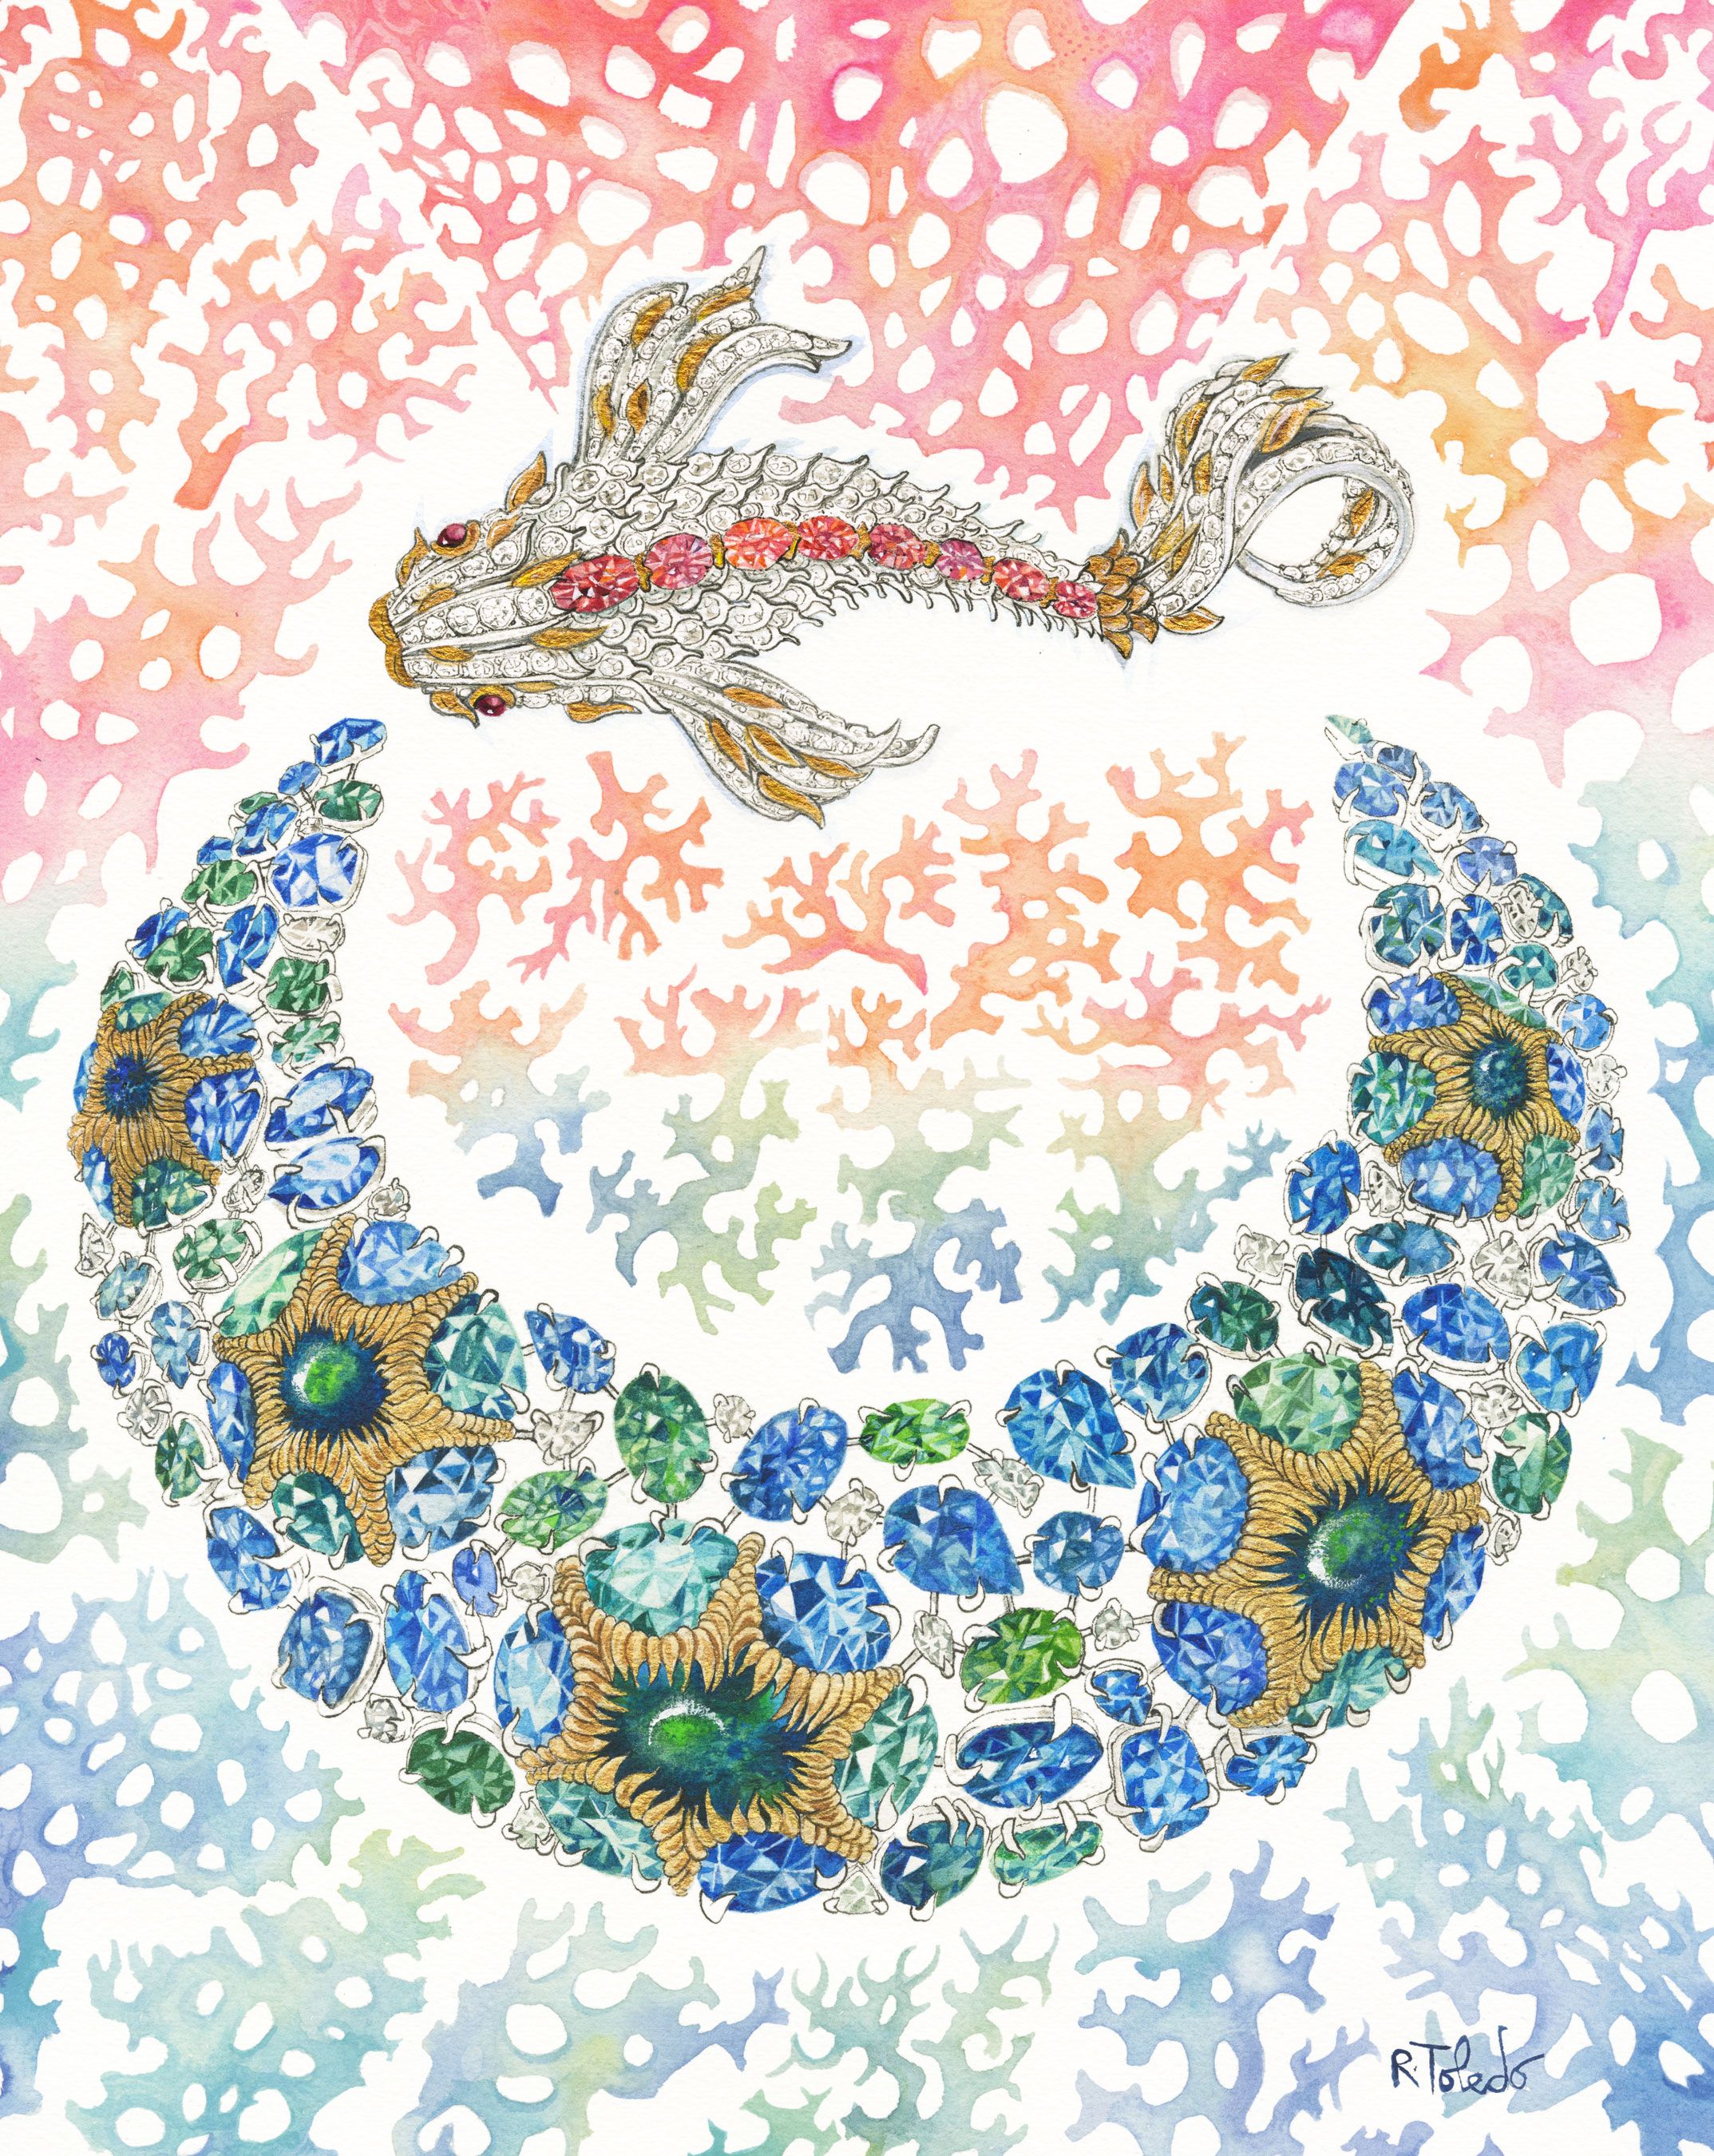 Tiffany & Co's Summer Blue Book Collection: Out of the Blue